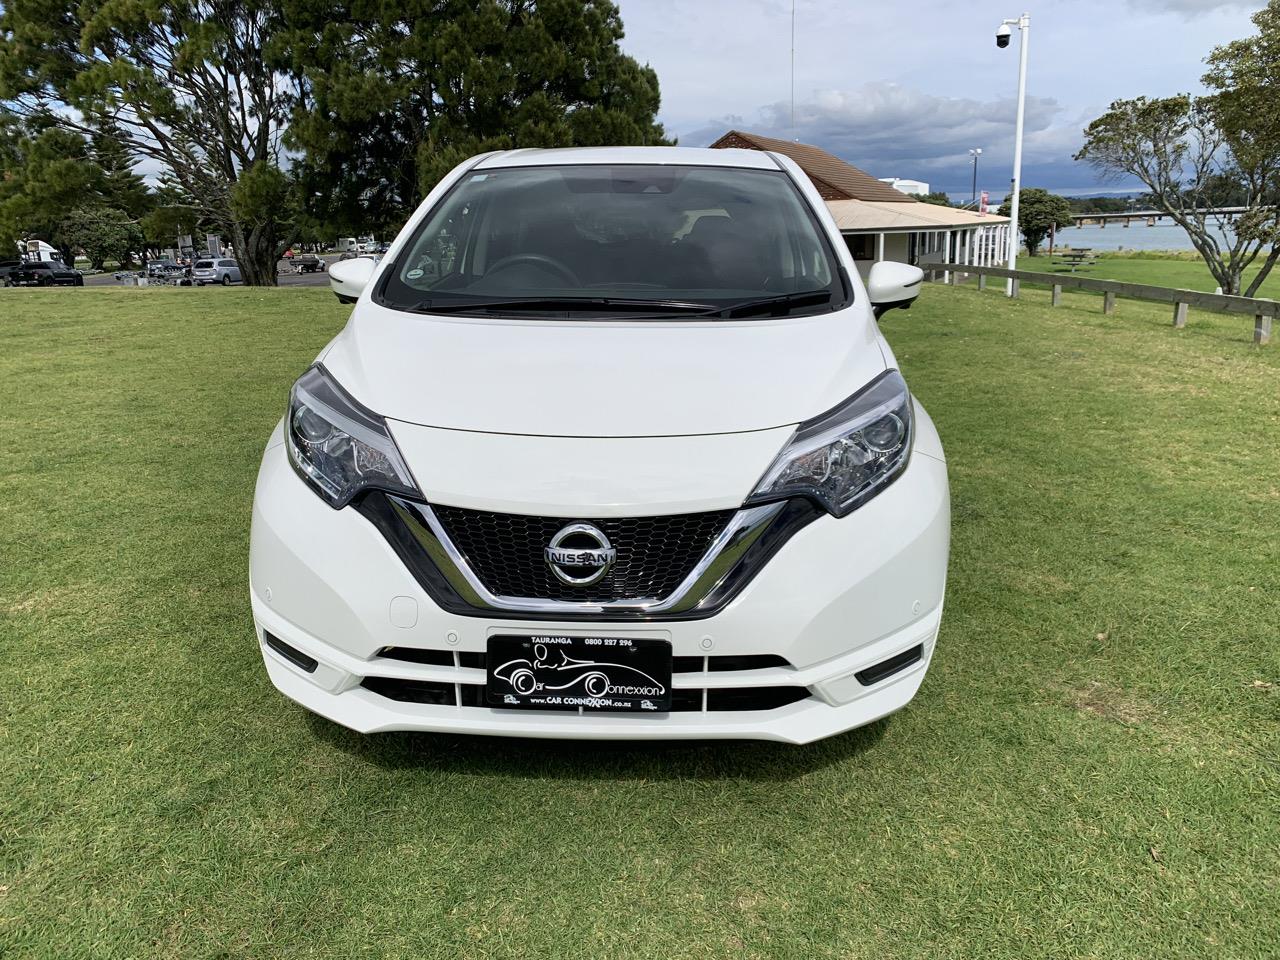 2018 Nissan NOTE